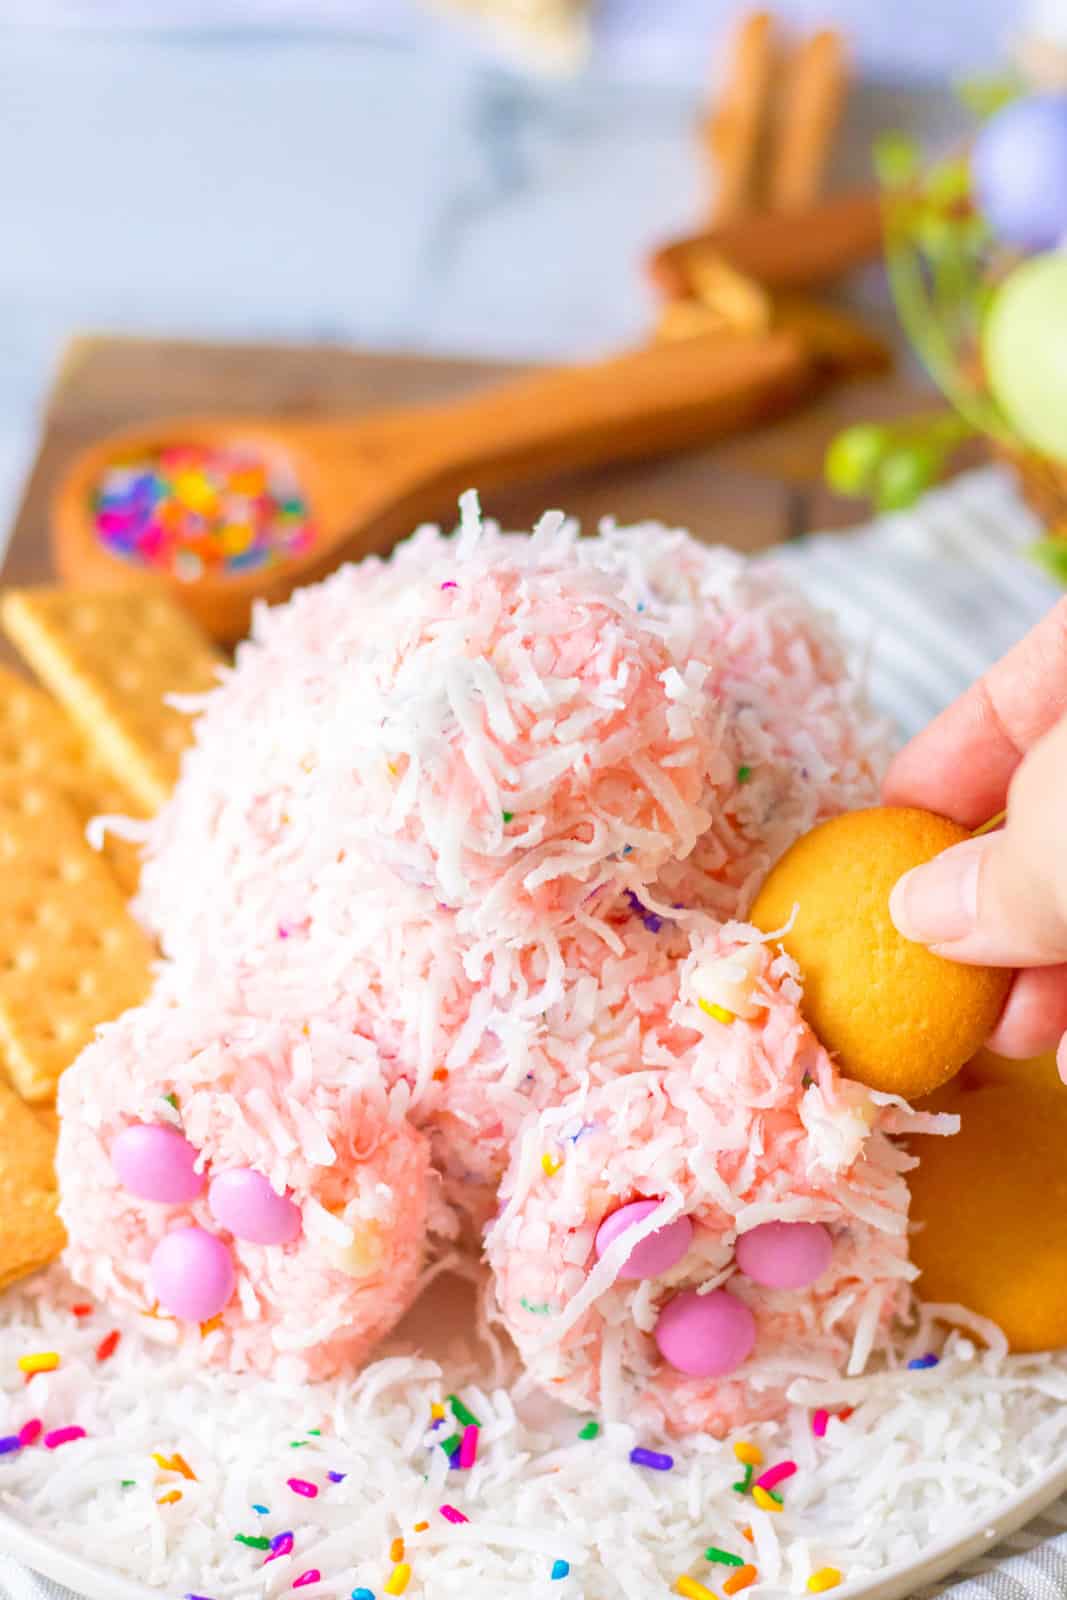 A hand dipping a nilla wafer in a bunny butt funfetti dip.